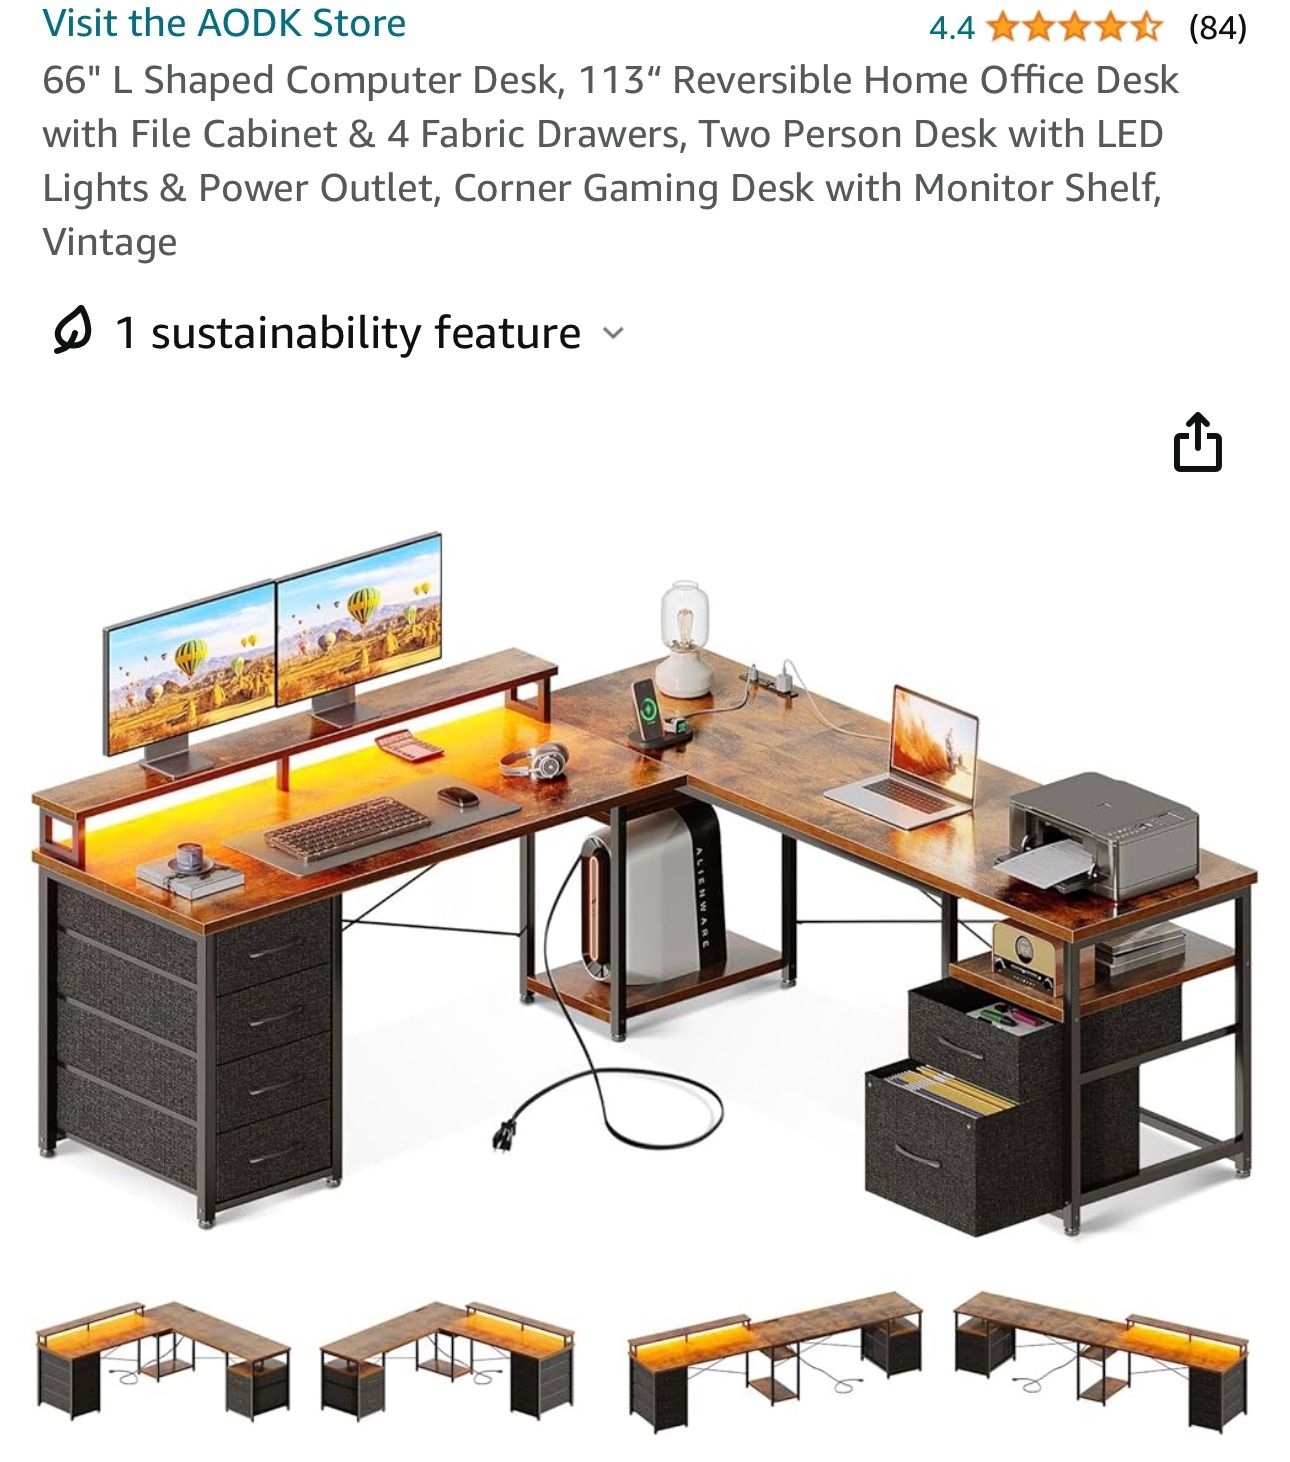 66" L Shaped Computer Desk, 113“ Reversible Home Office Desk with File Cabinet & 4 Fabric Drawers, Two Person Desk with LED Lights & Power Outlet, Cor